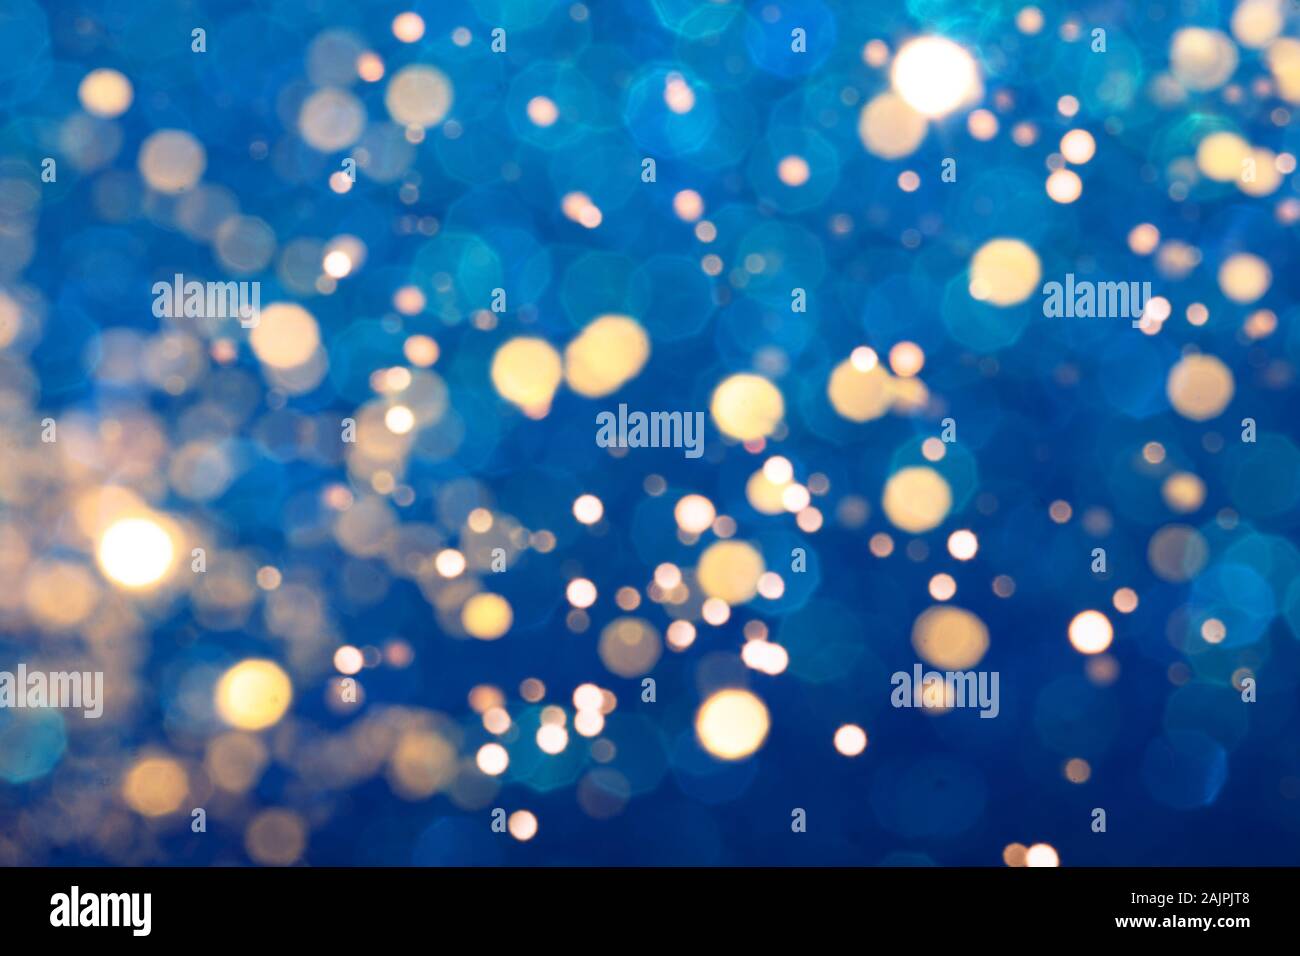 Blue festive background with sparkles in the bokeh. The concept of the celebration, the day of Christmas, New Year, birthday, ceremonies, events, etc. Stock Photo